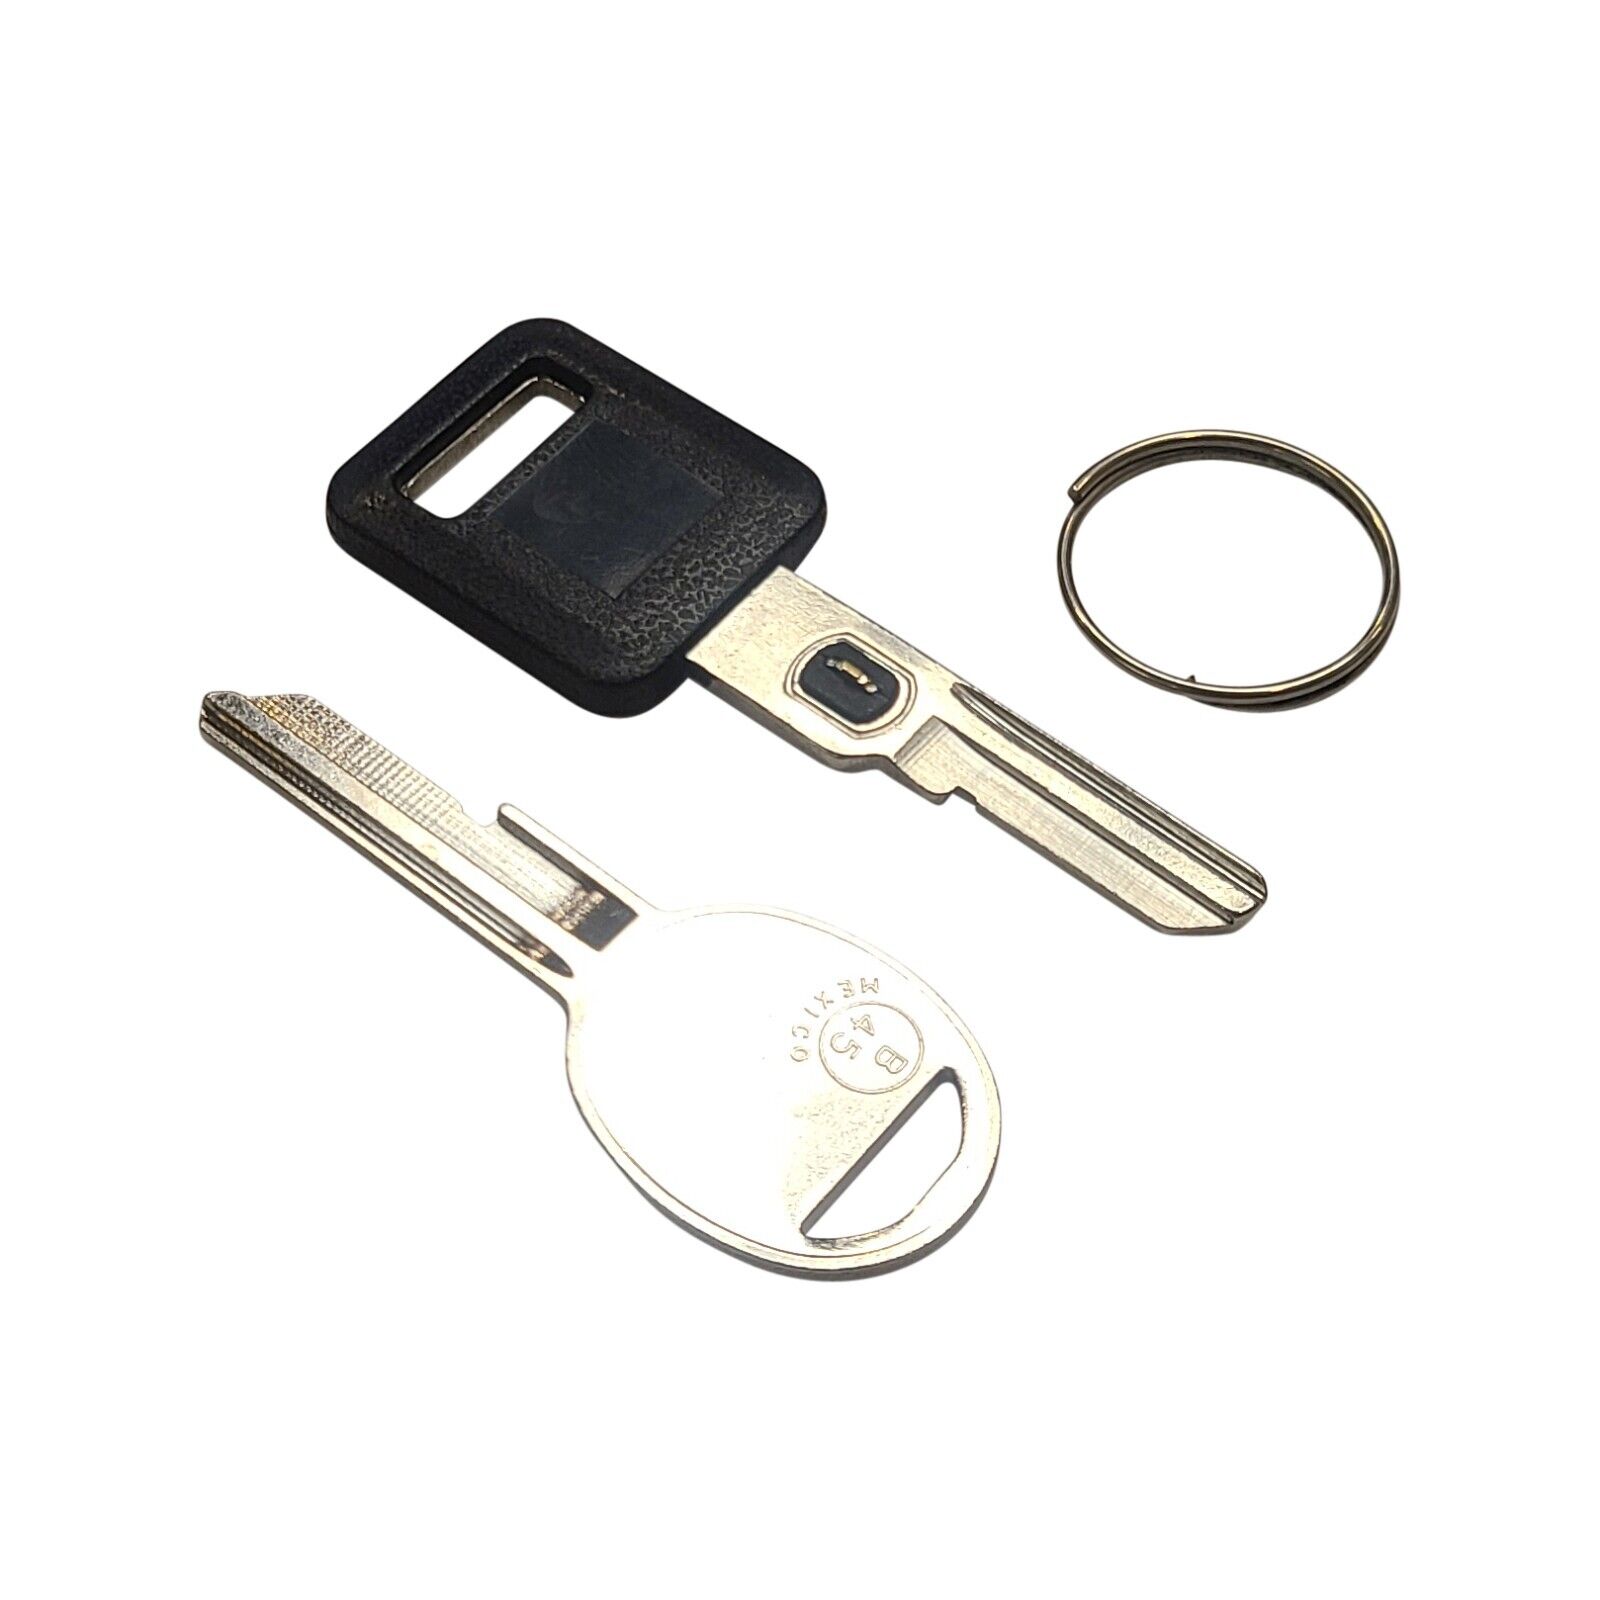 New Ignition VATS Resistor Key B62-P13 For Gm Vehicles And H Door Key B45